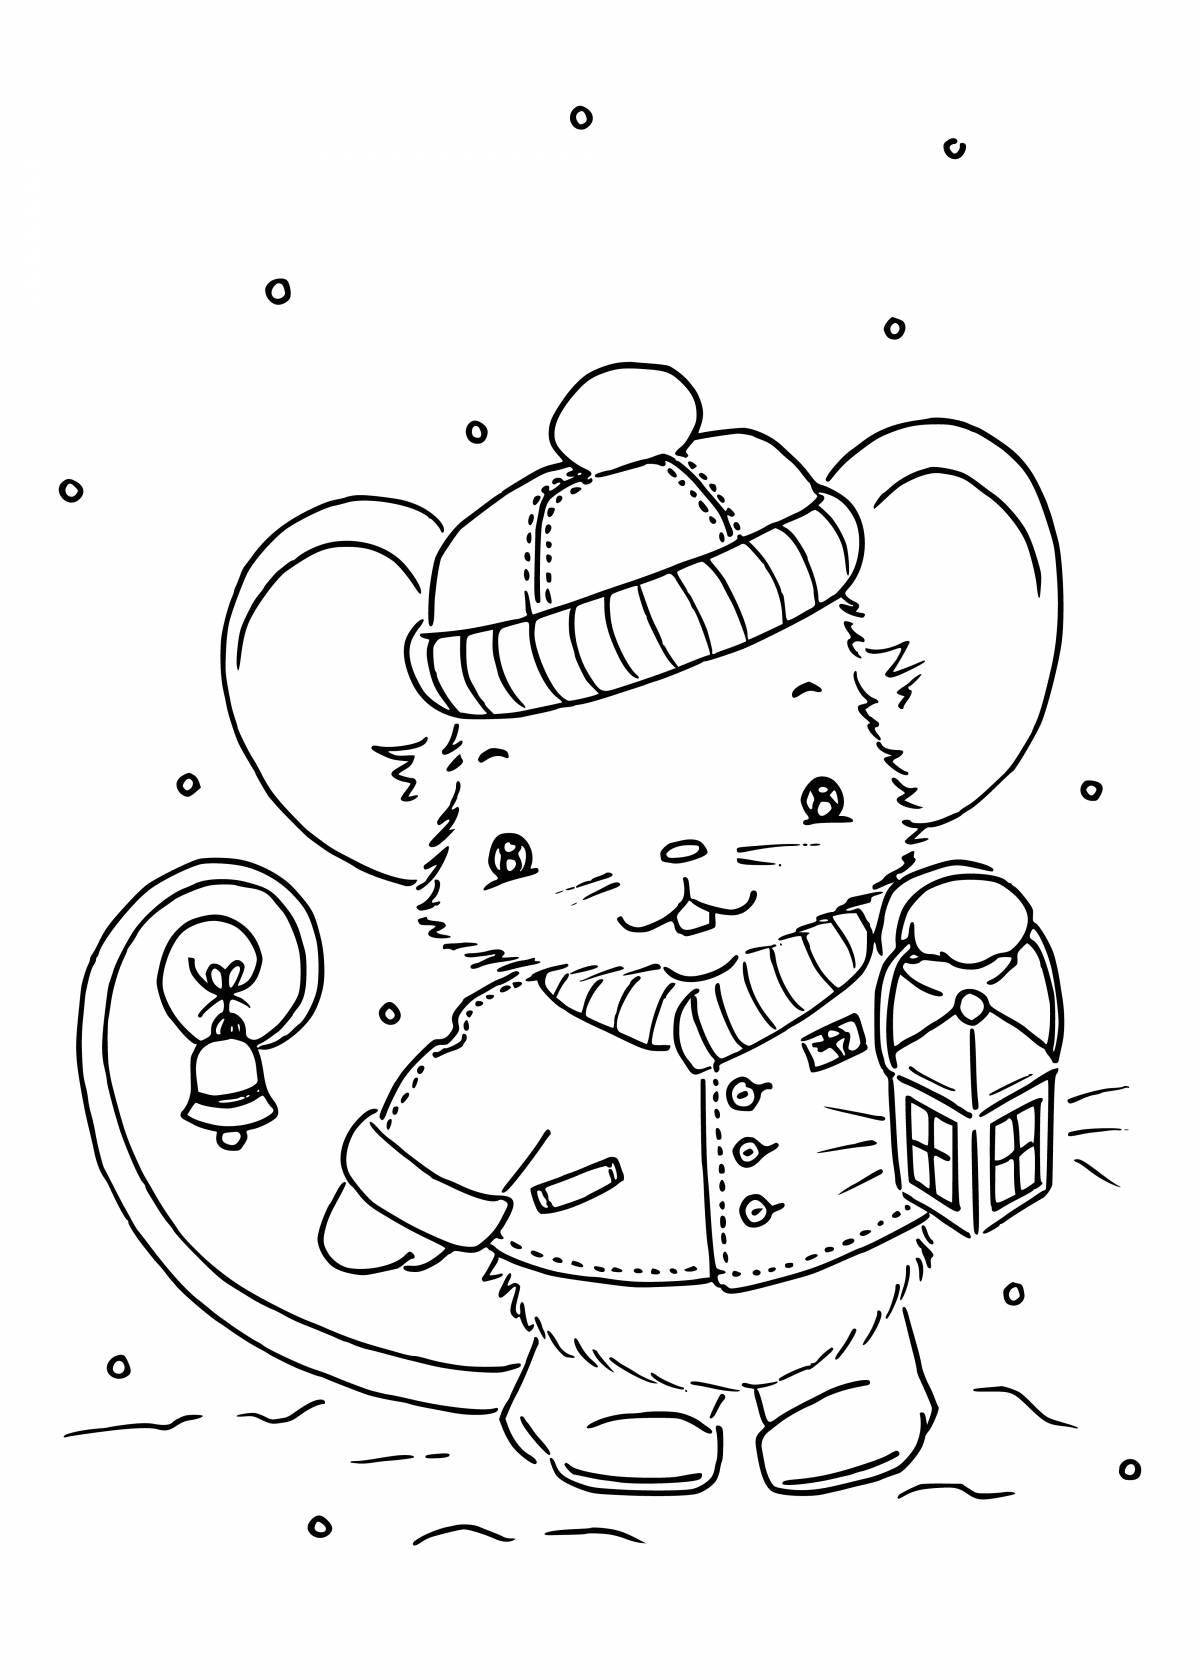 Colorful cute christmas coloring book